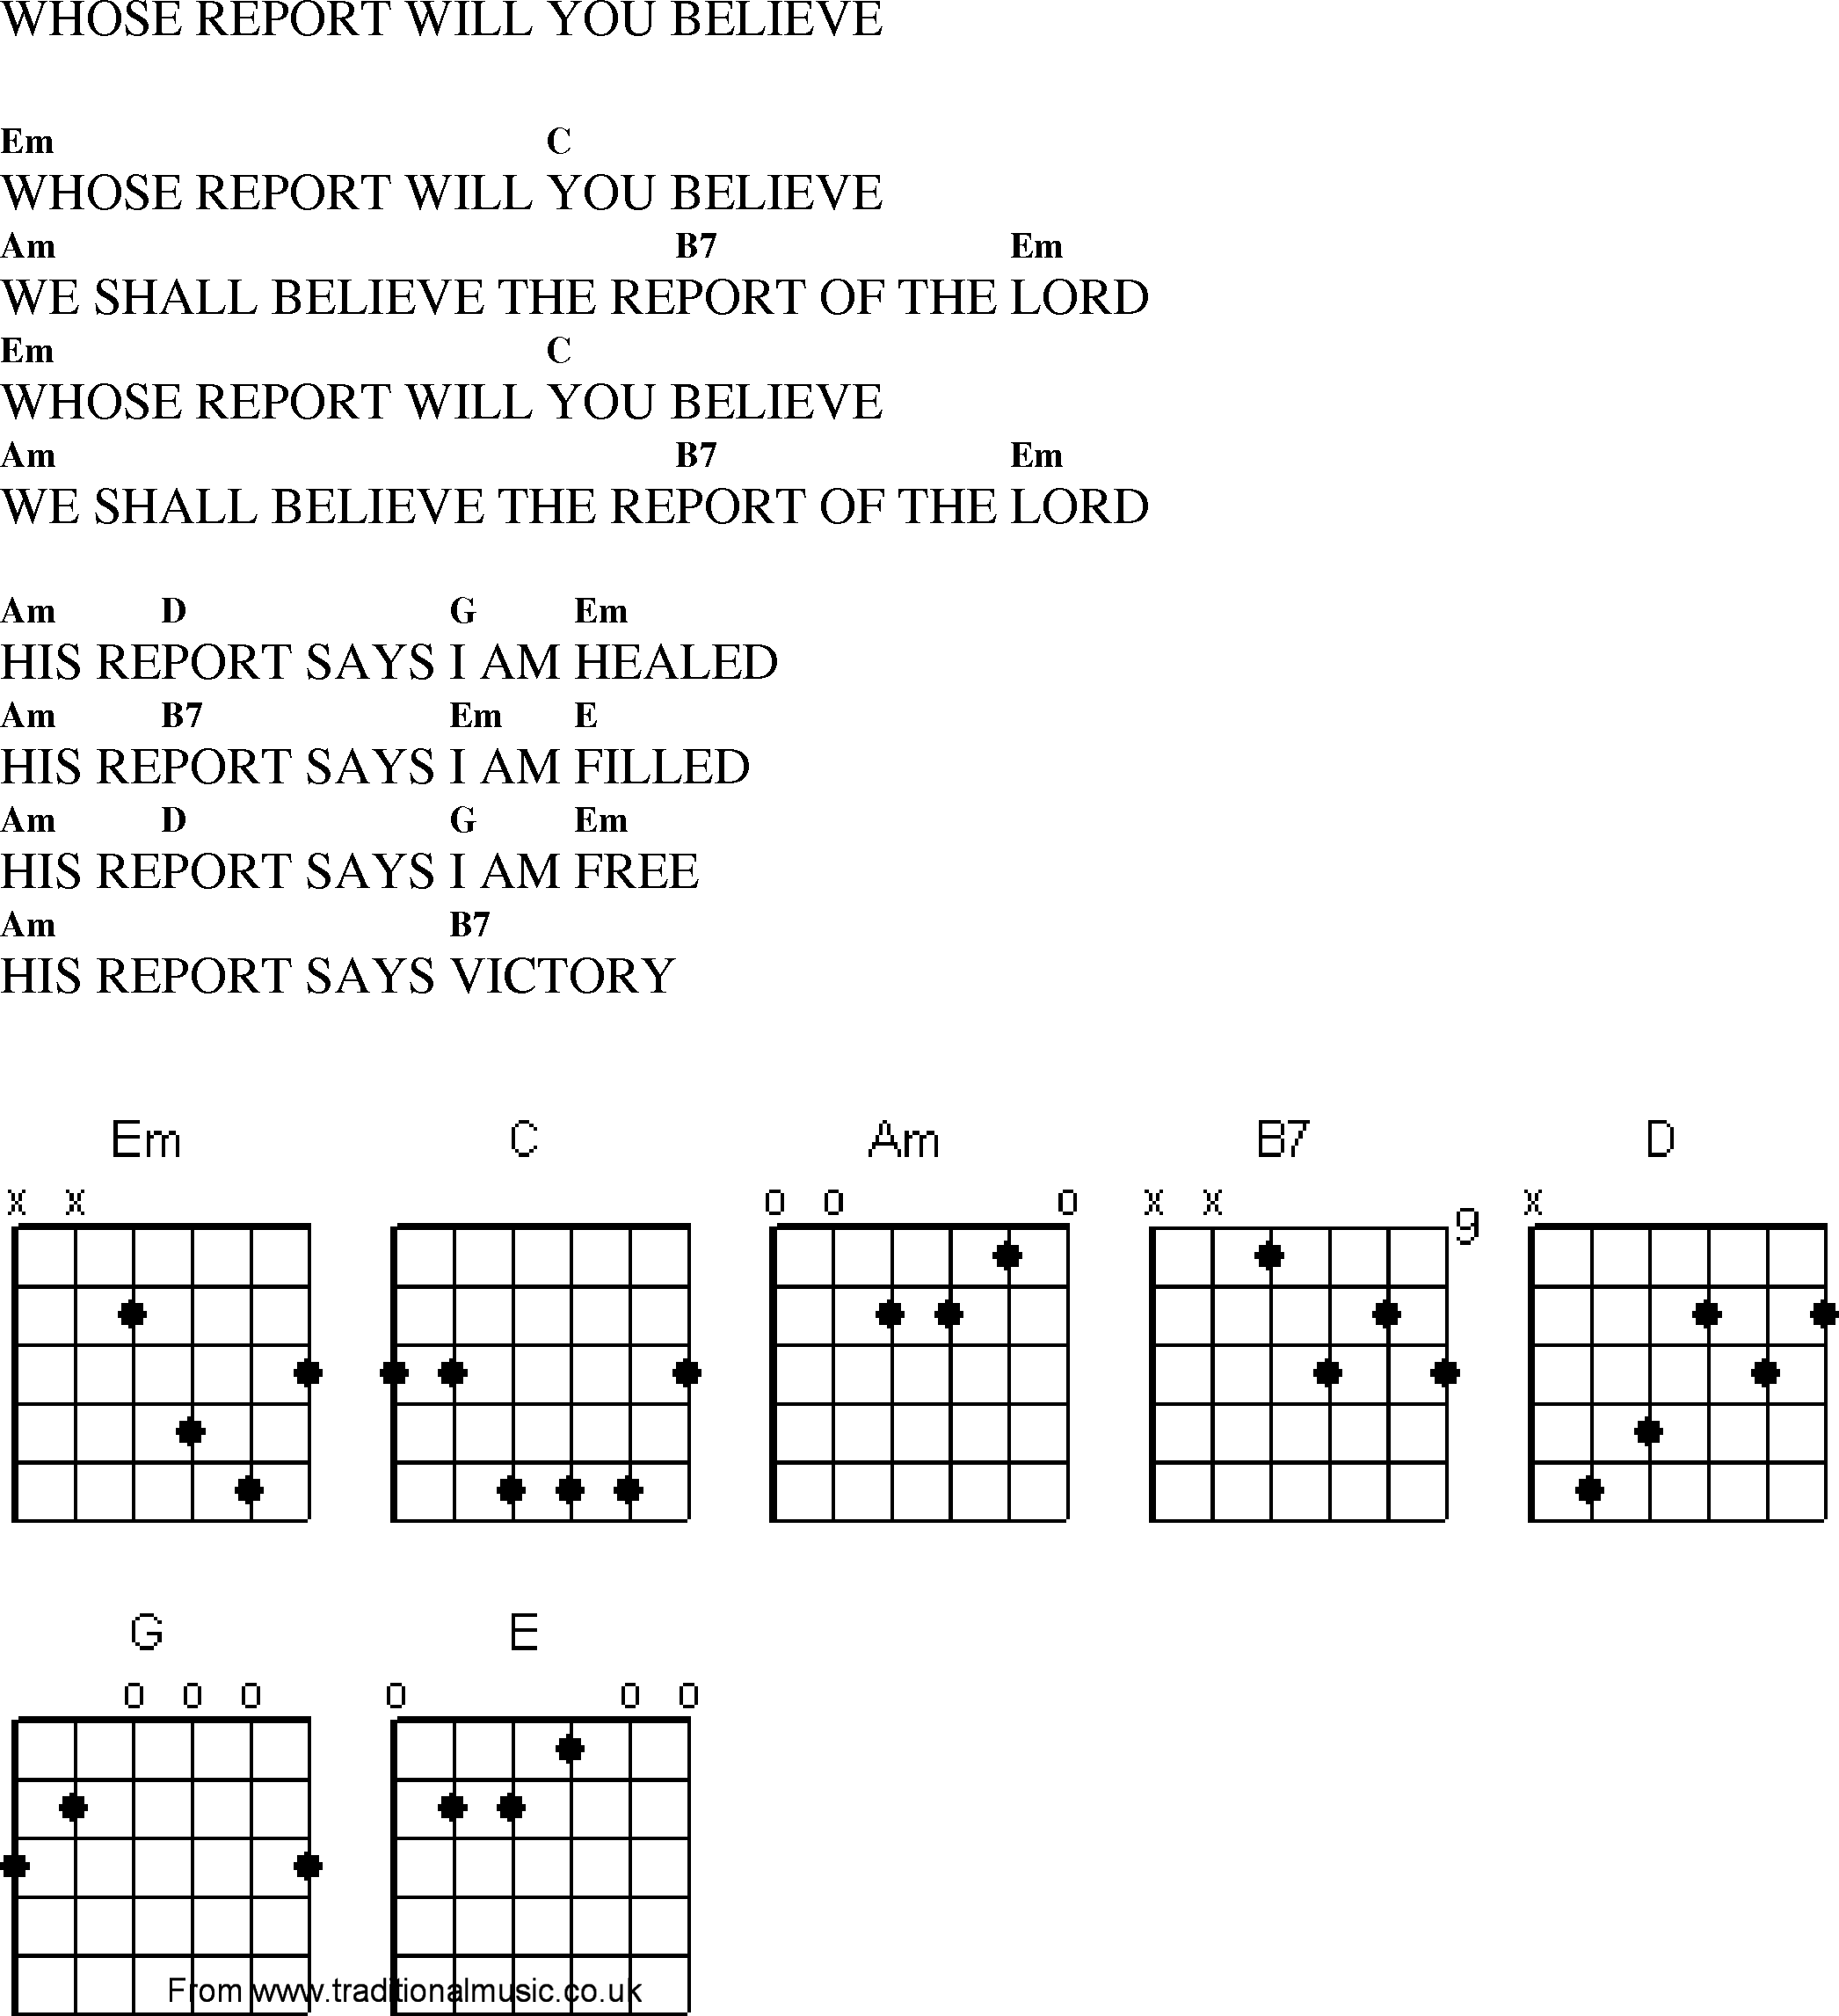 Gospel Song: whose_report_will_you_believe, lyrics and chords.